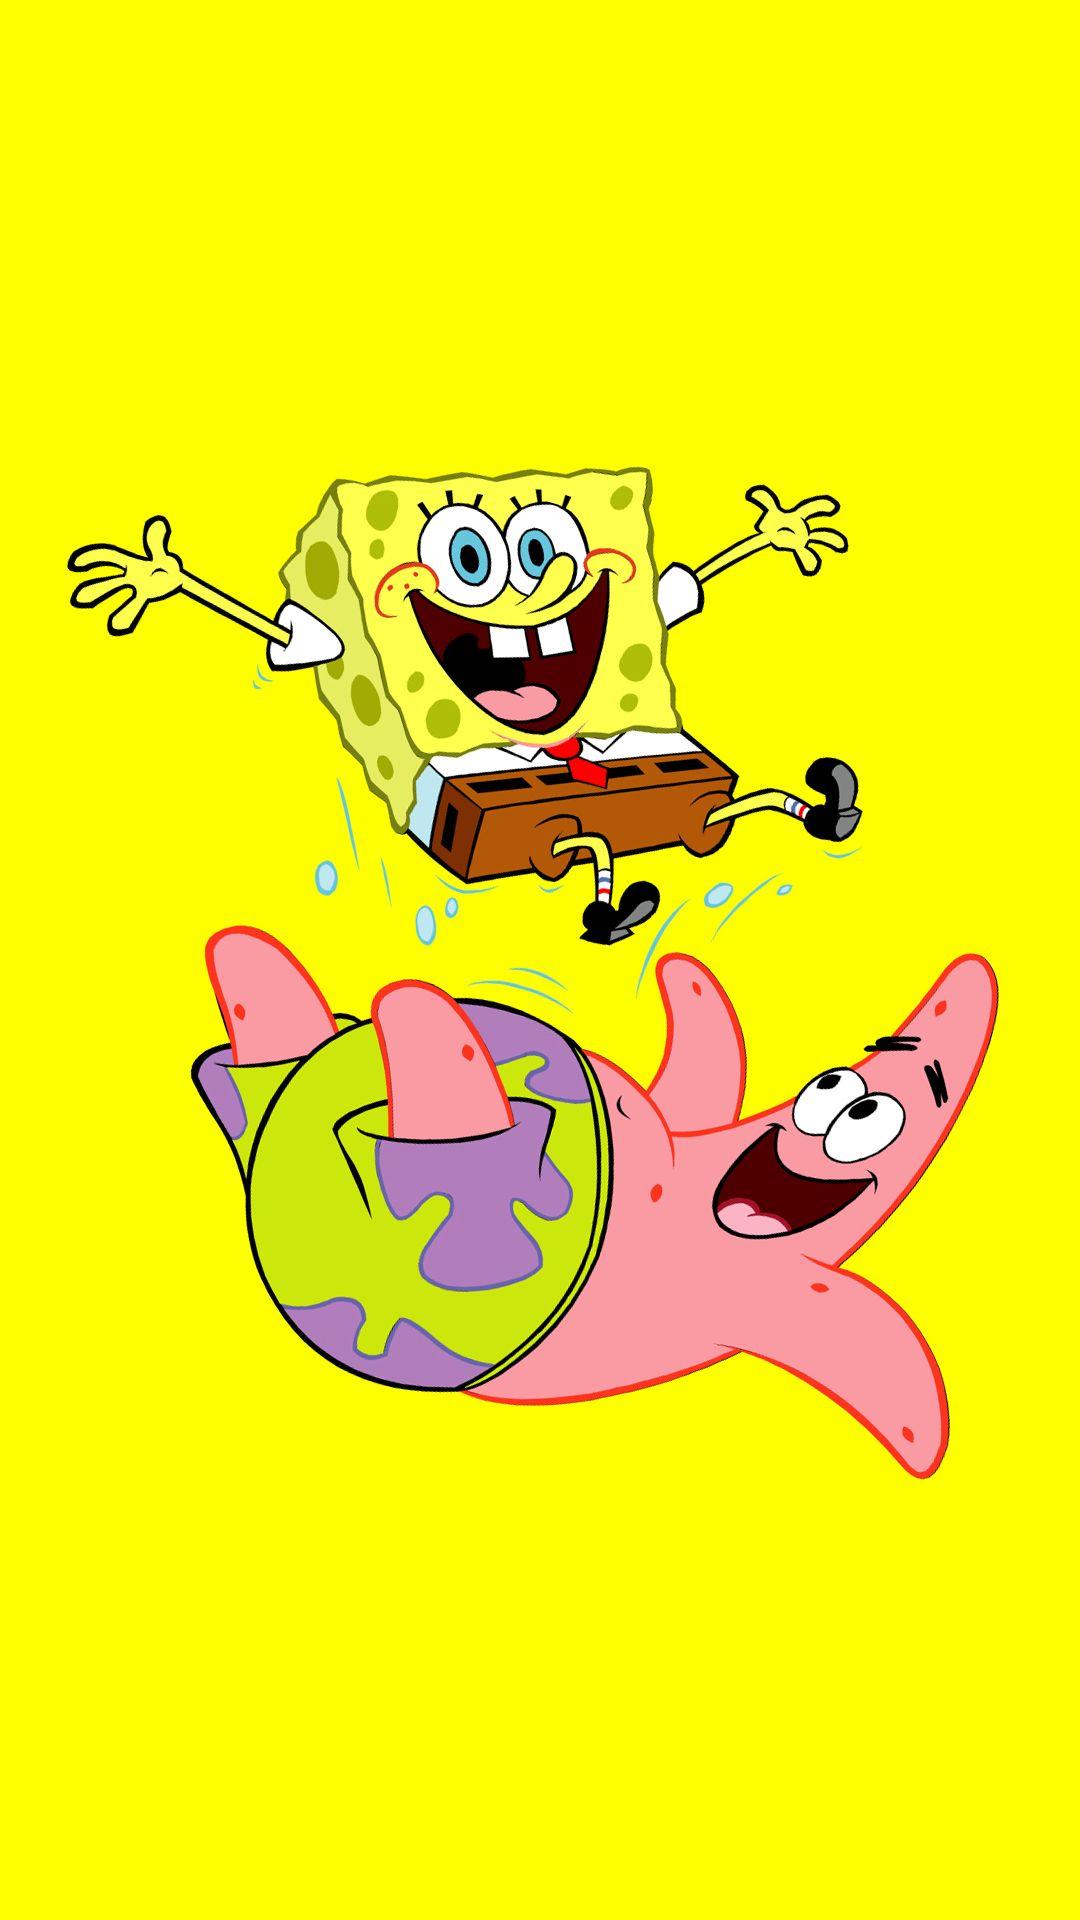 Funny SpongeBob And Patrick htc one wallpaper, free and easy